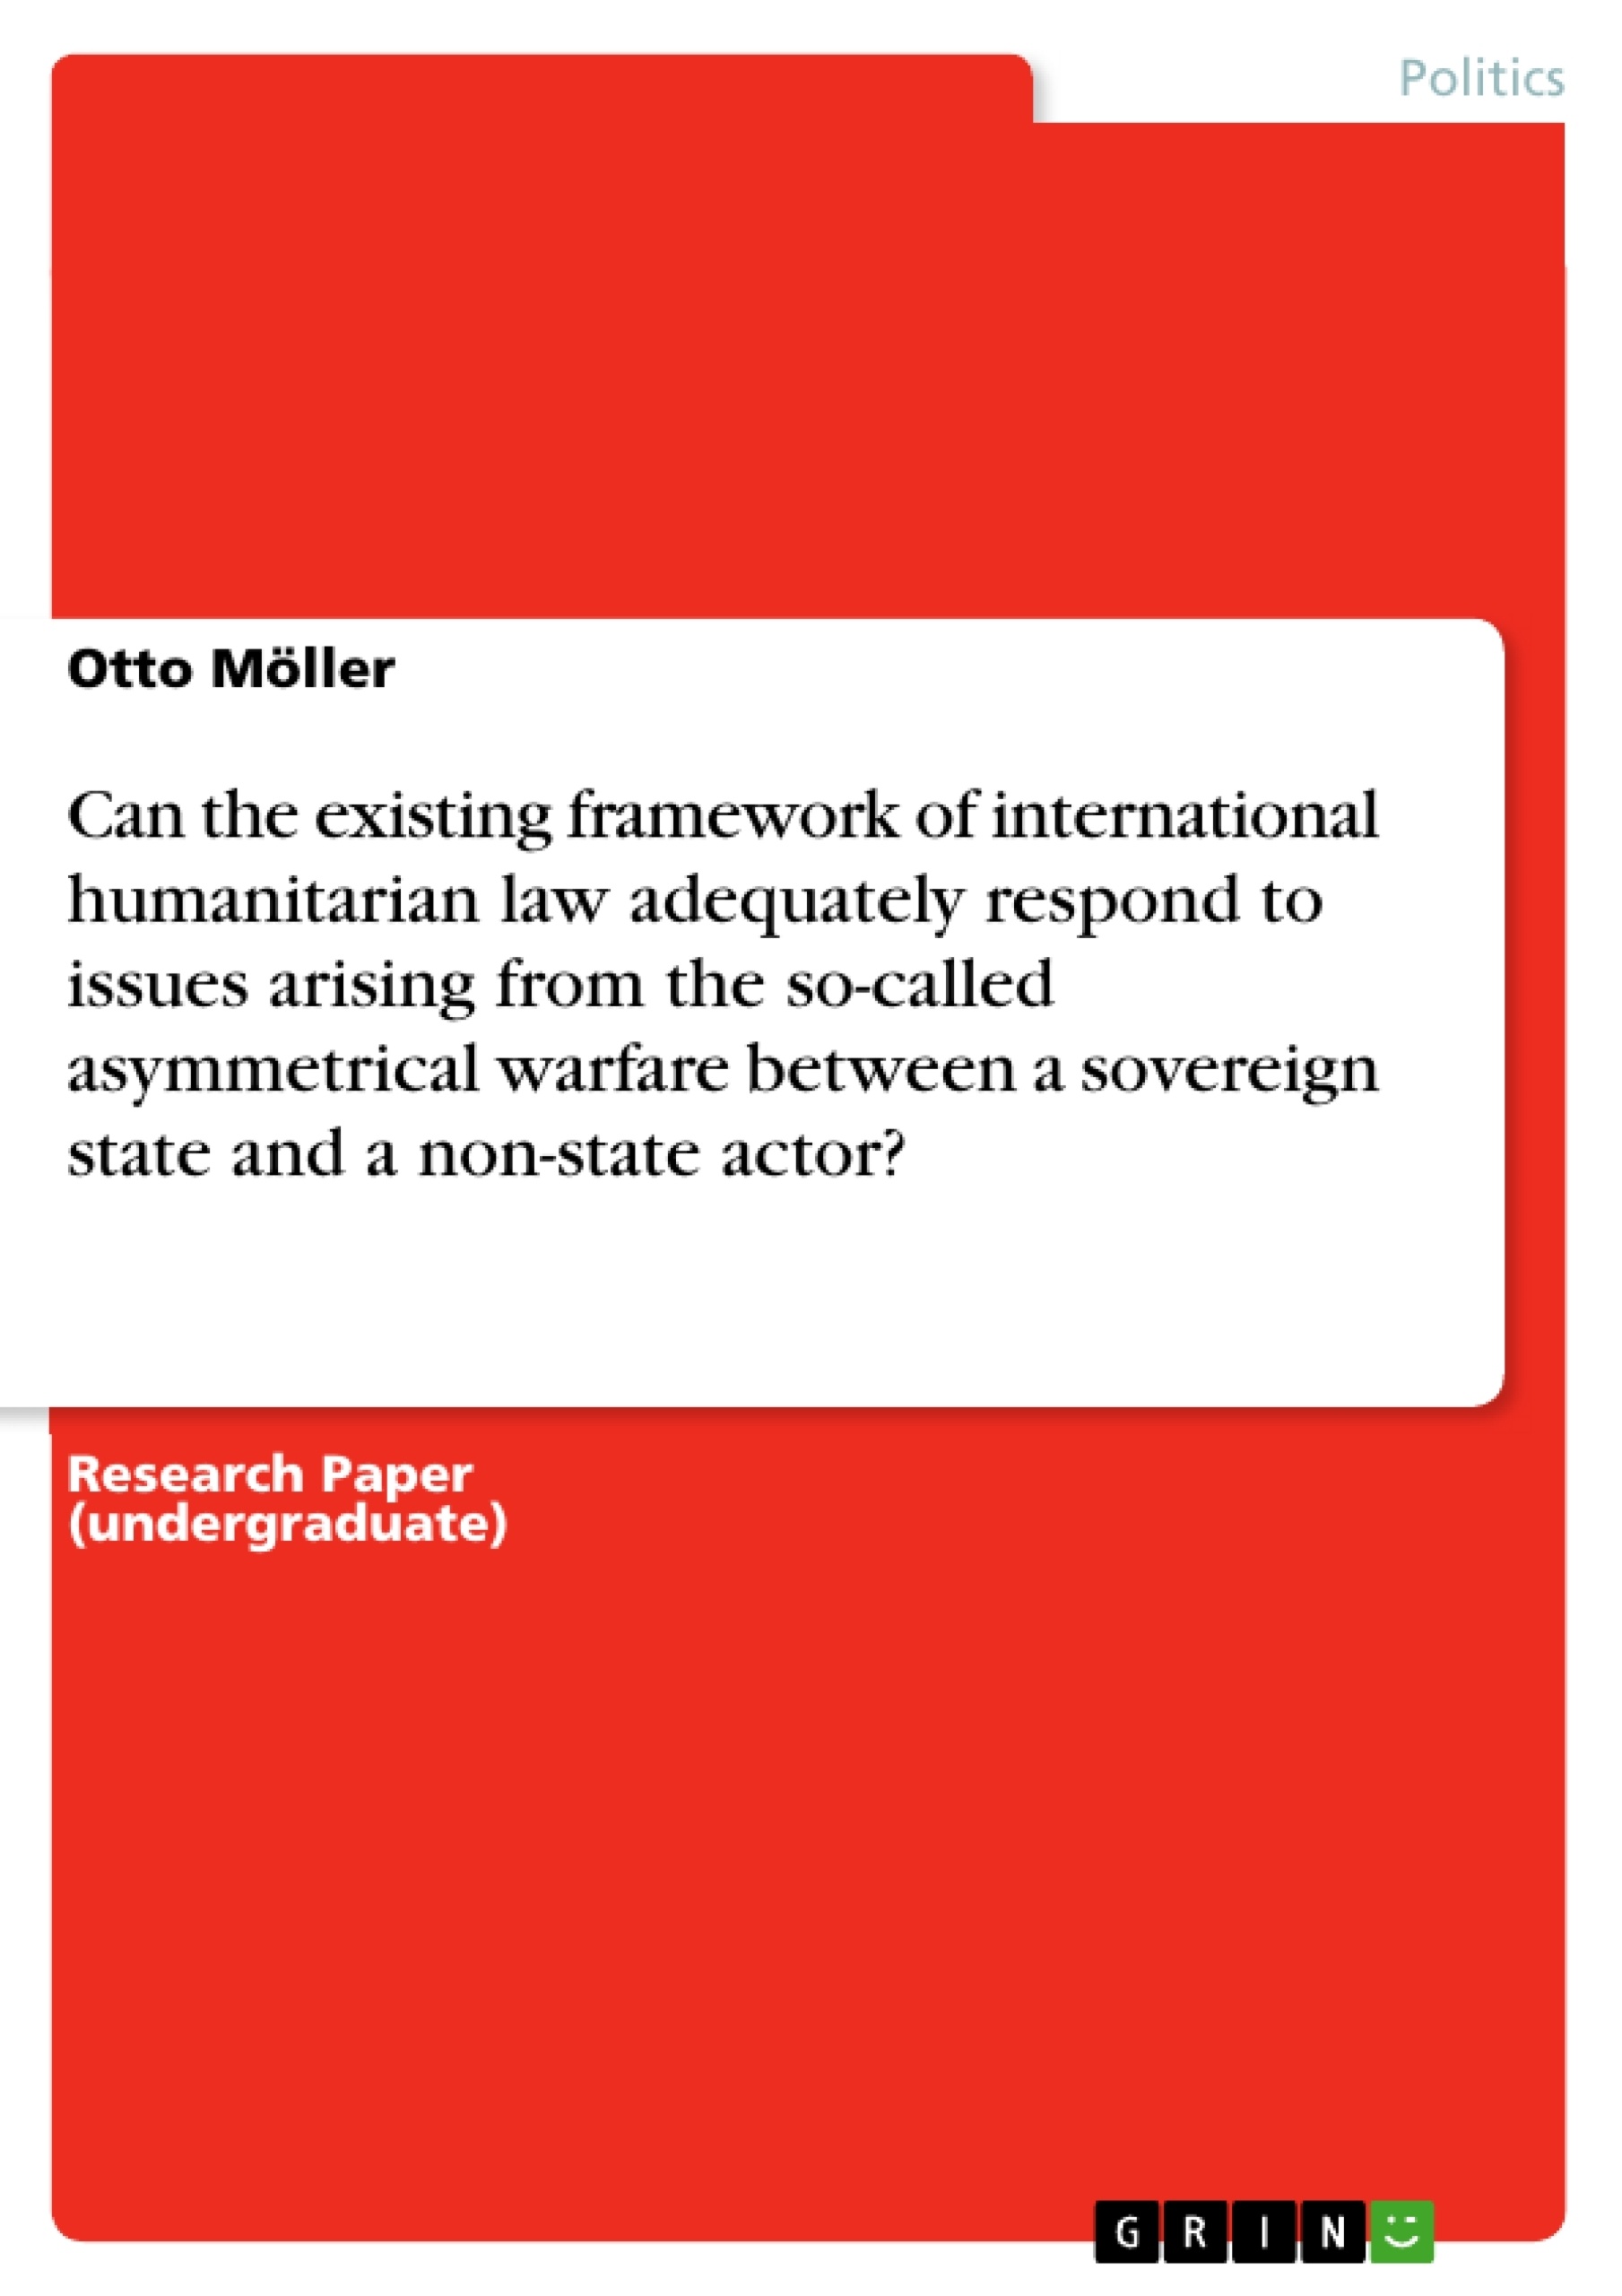 Title: Can the existing framework of international humanitarian law adequately respond to issues arising from the so-called asymmetrical warfare between a sovereign state and a non-state actor?